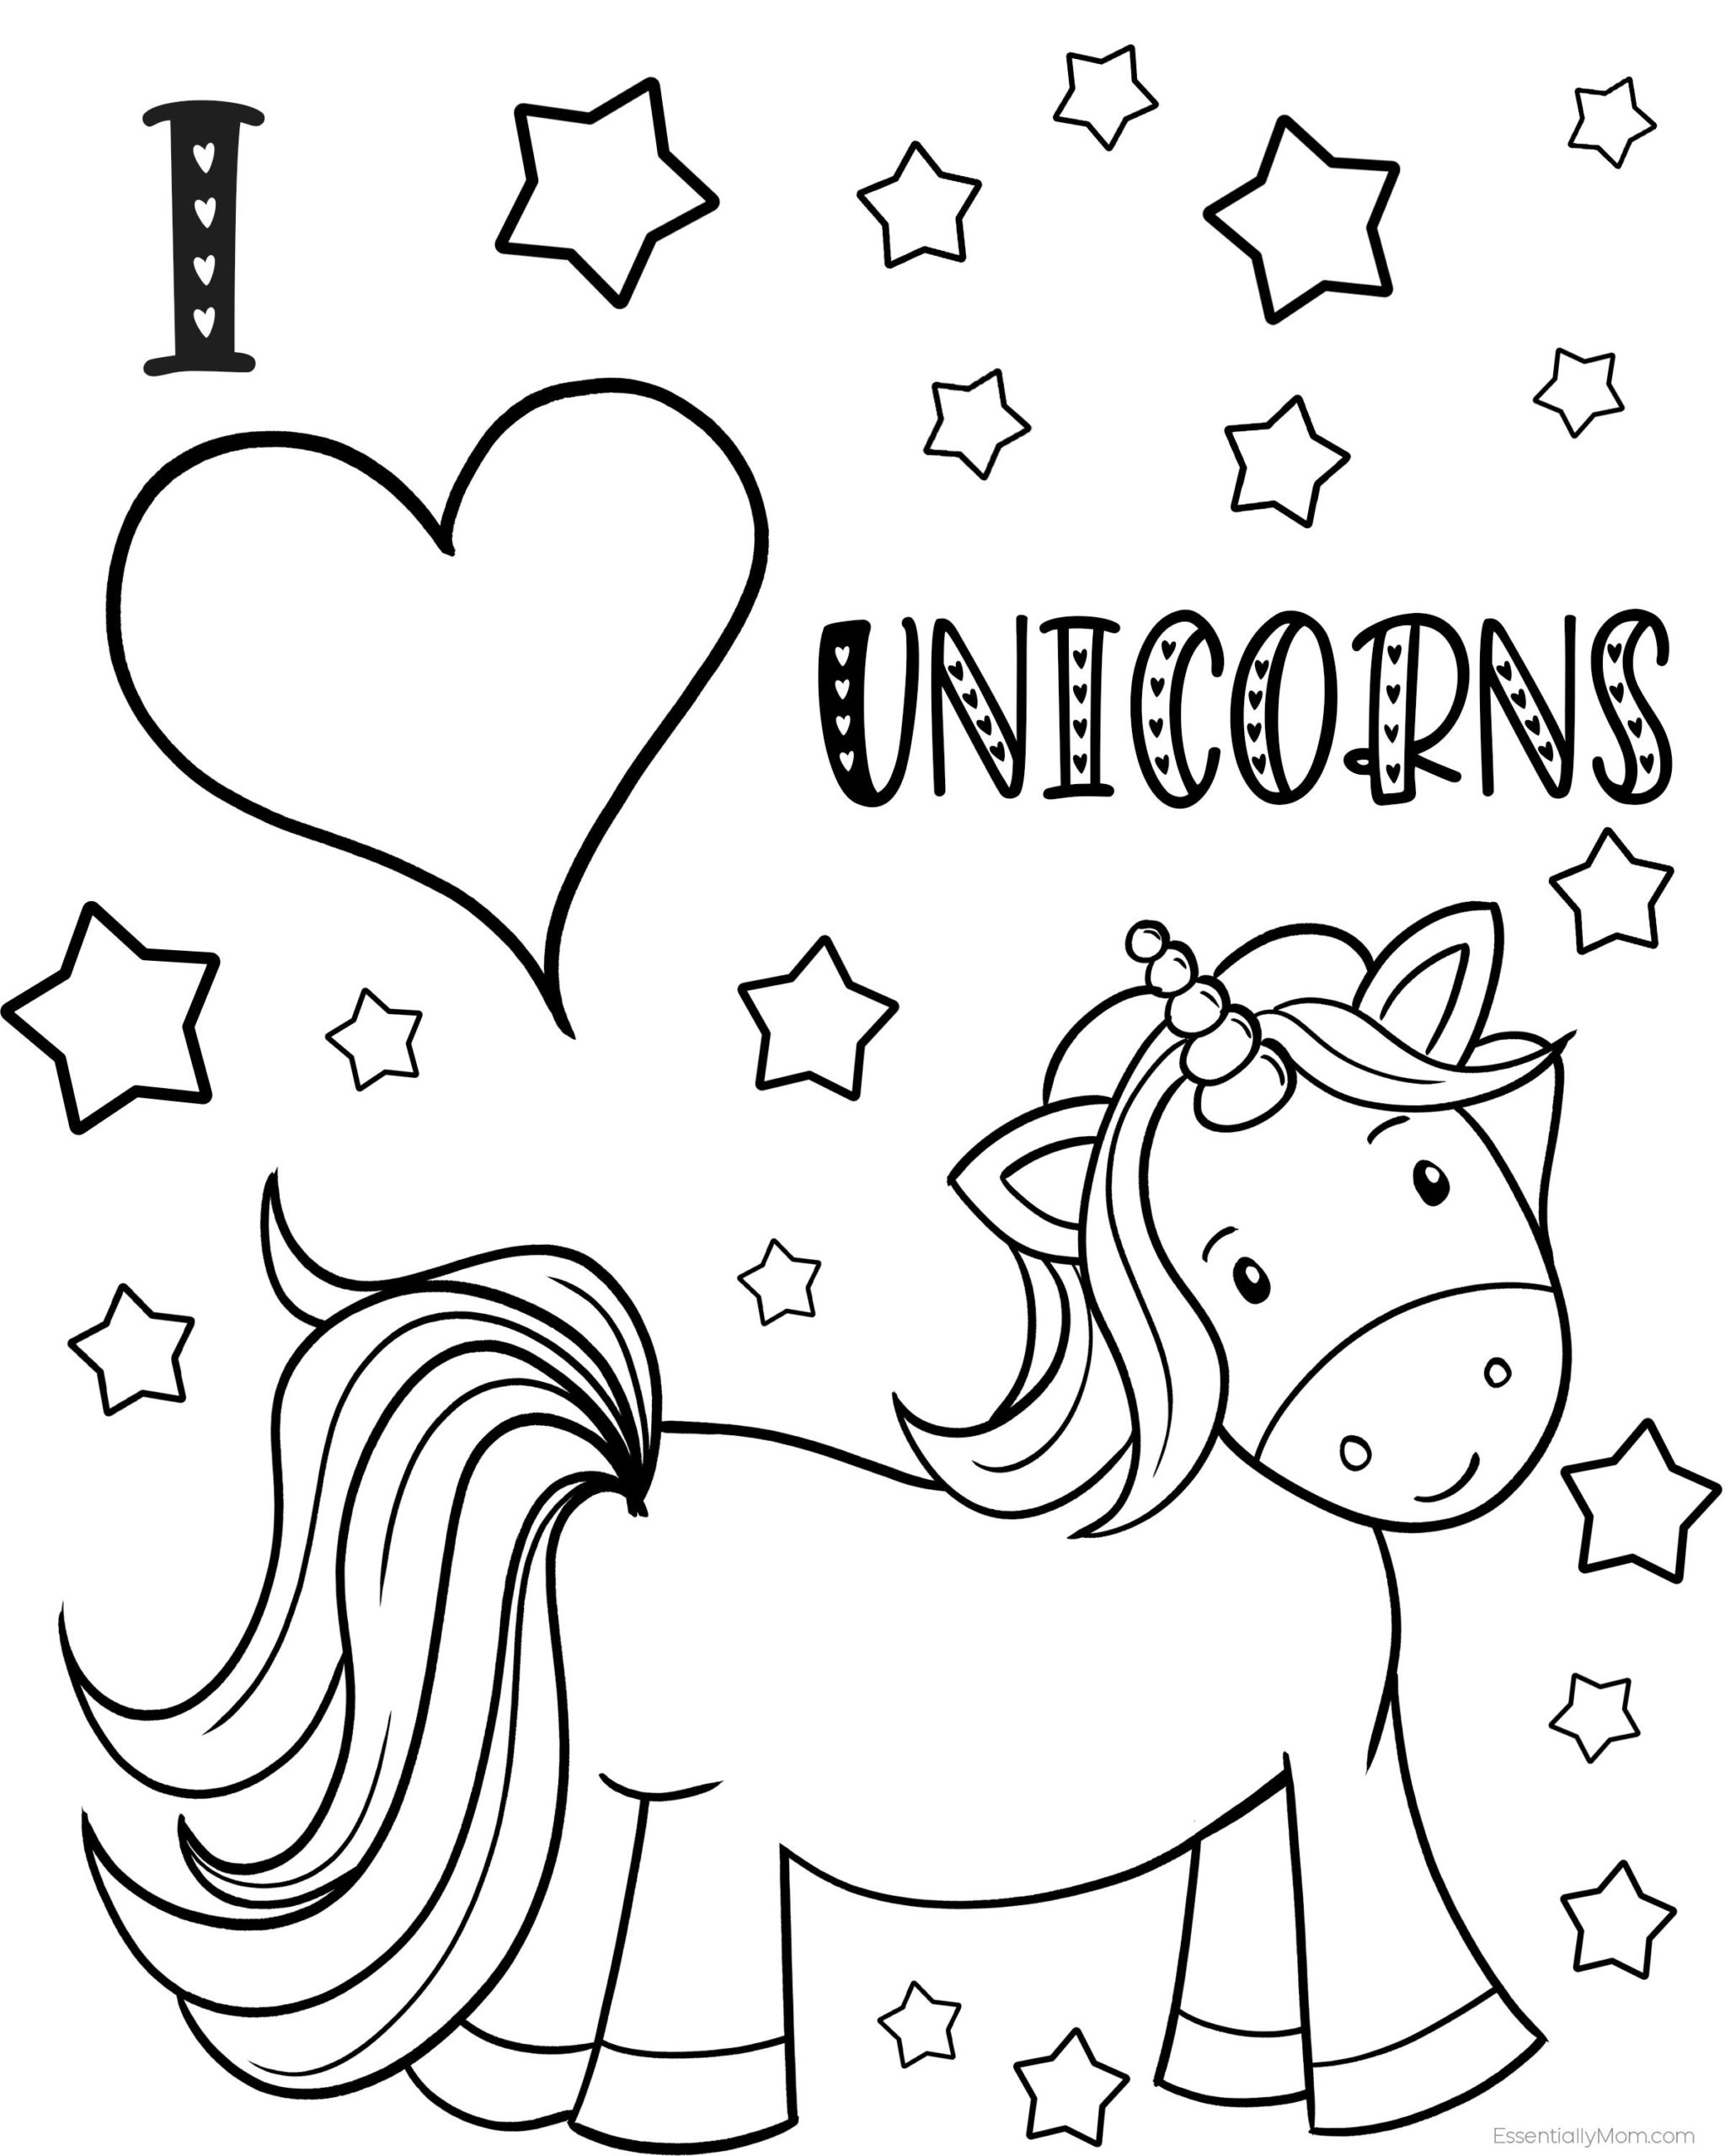 free unicorn coloring pages printable for kids unicorn